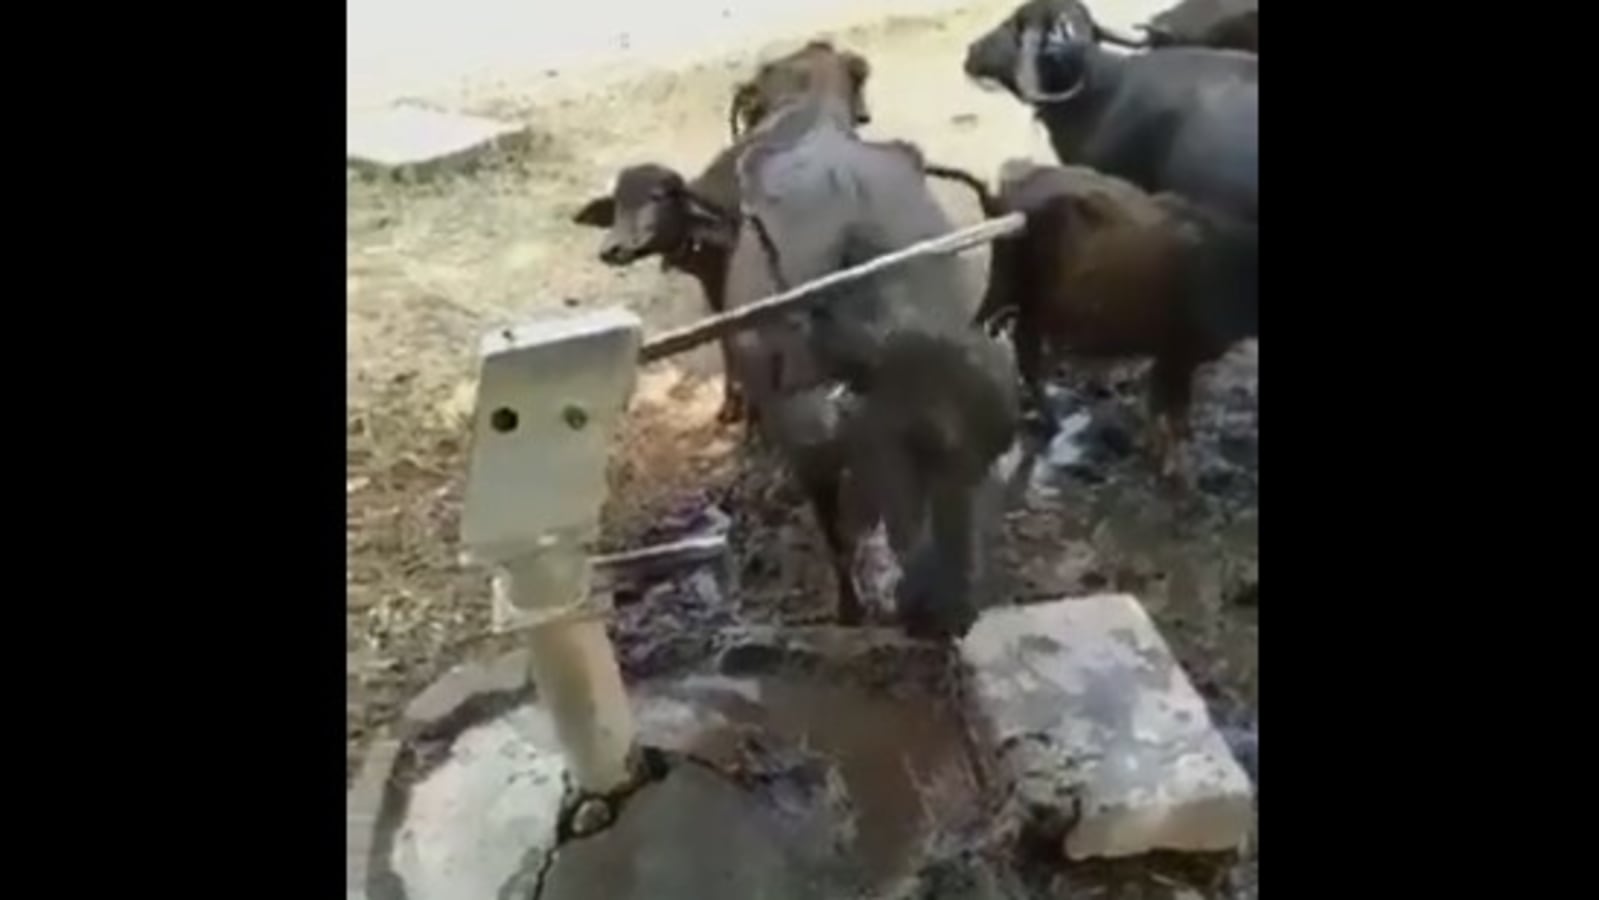 Buffalo uses horn get from hand pump, video wows people | Trending Hindustan